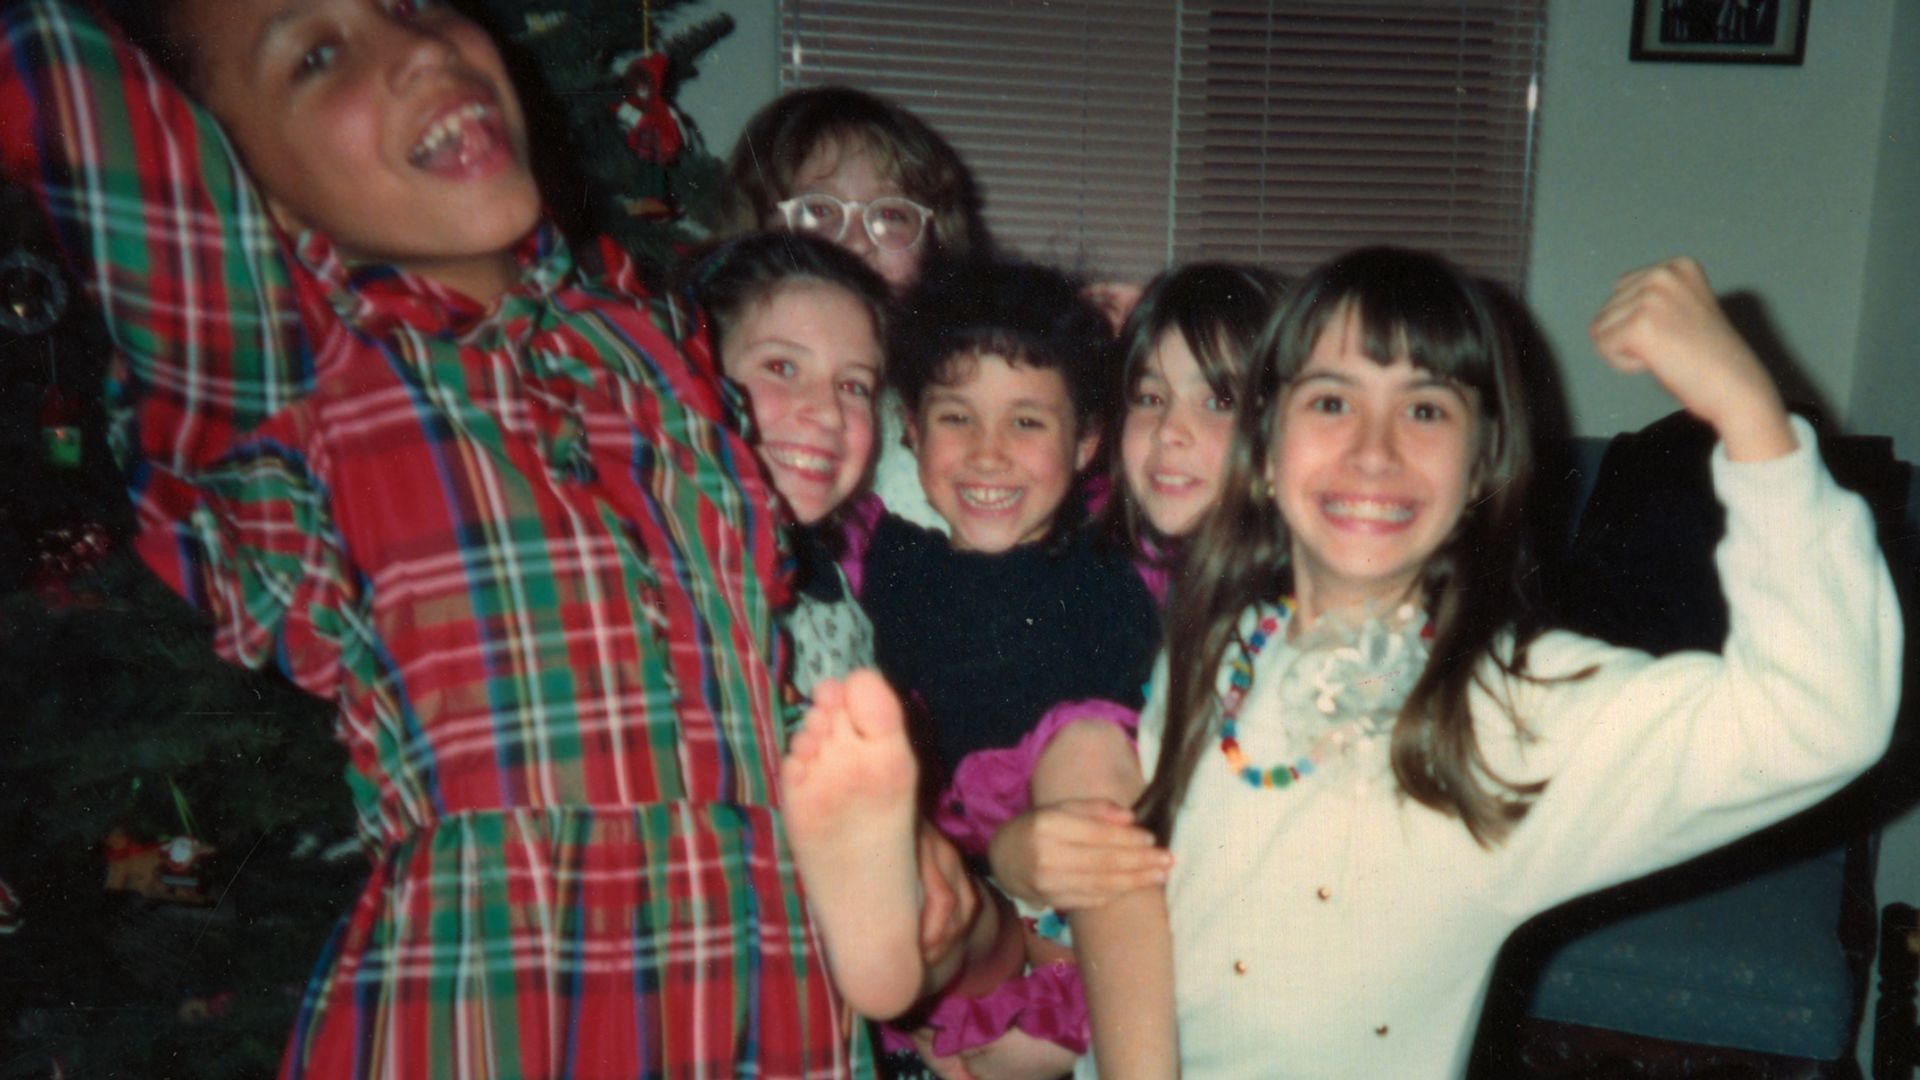 A young Meghan Markle being picked up by a group of friends with a Christmas tree in the background